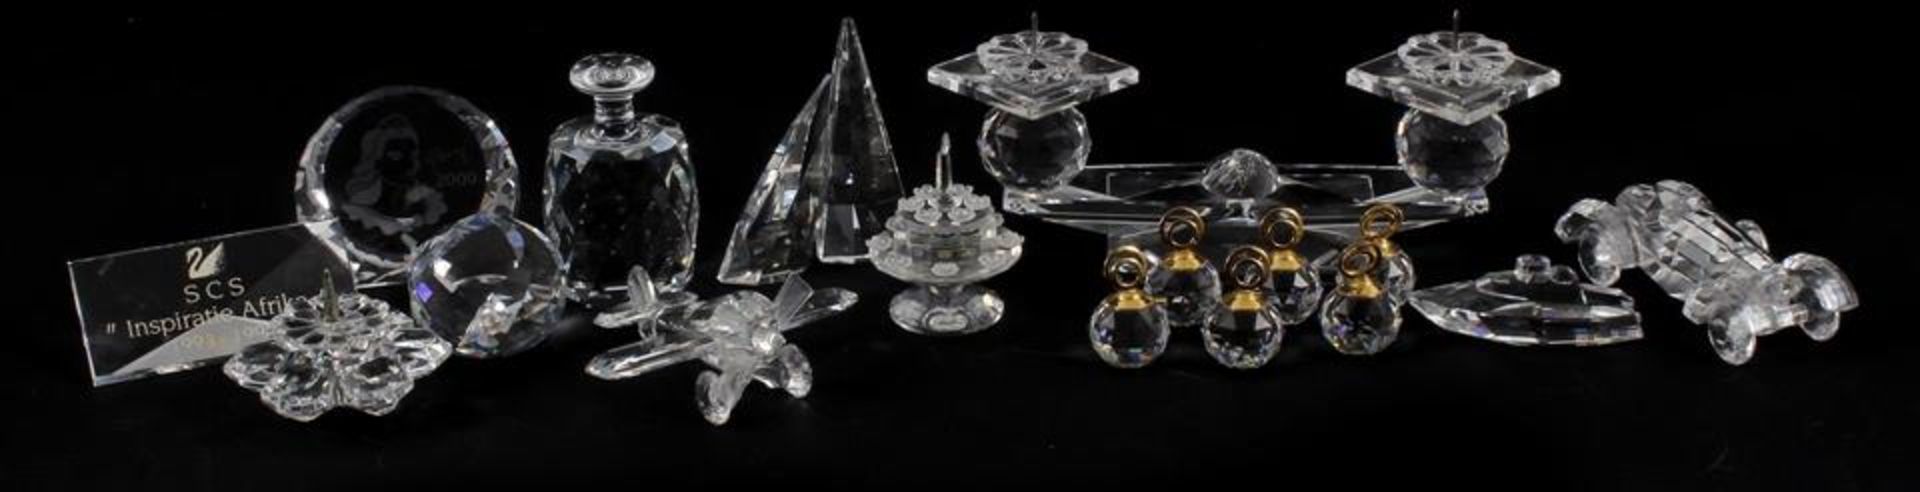 Collection of Swarovski crystal objects including classic car, plane, sailing boat 8.5 cm high, 2-